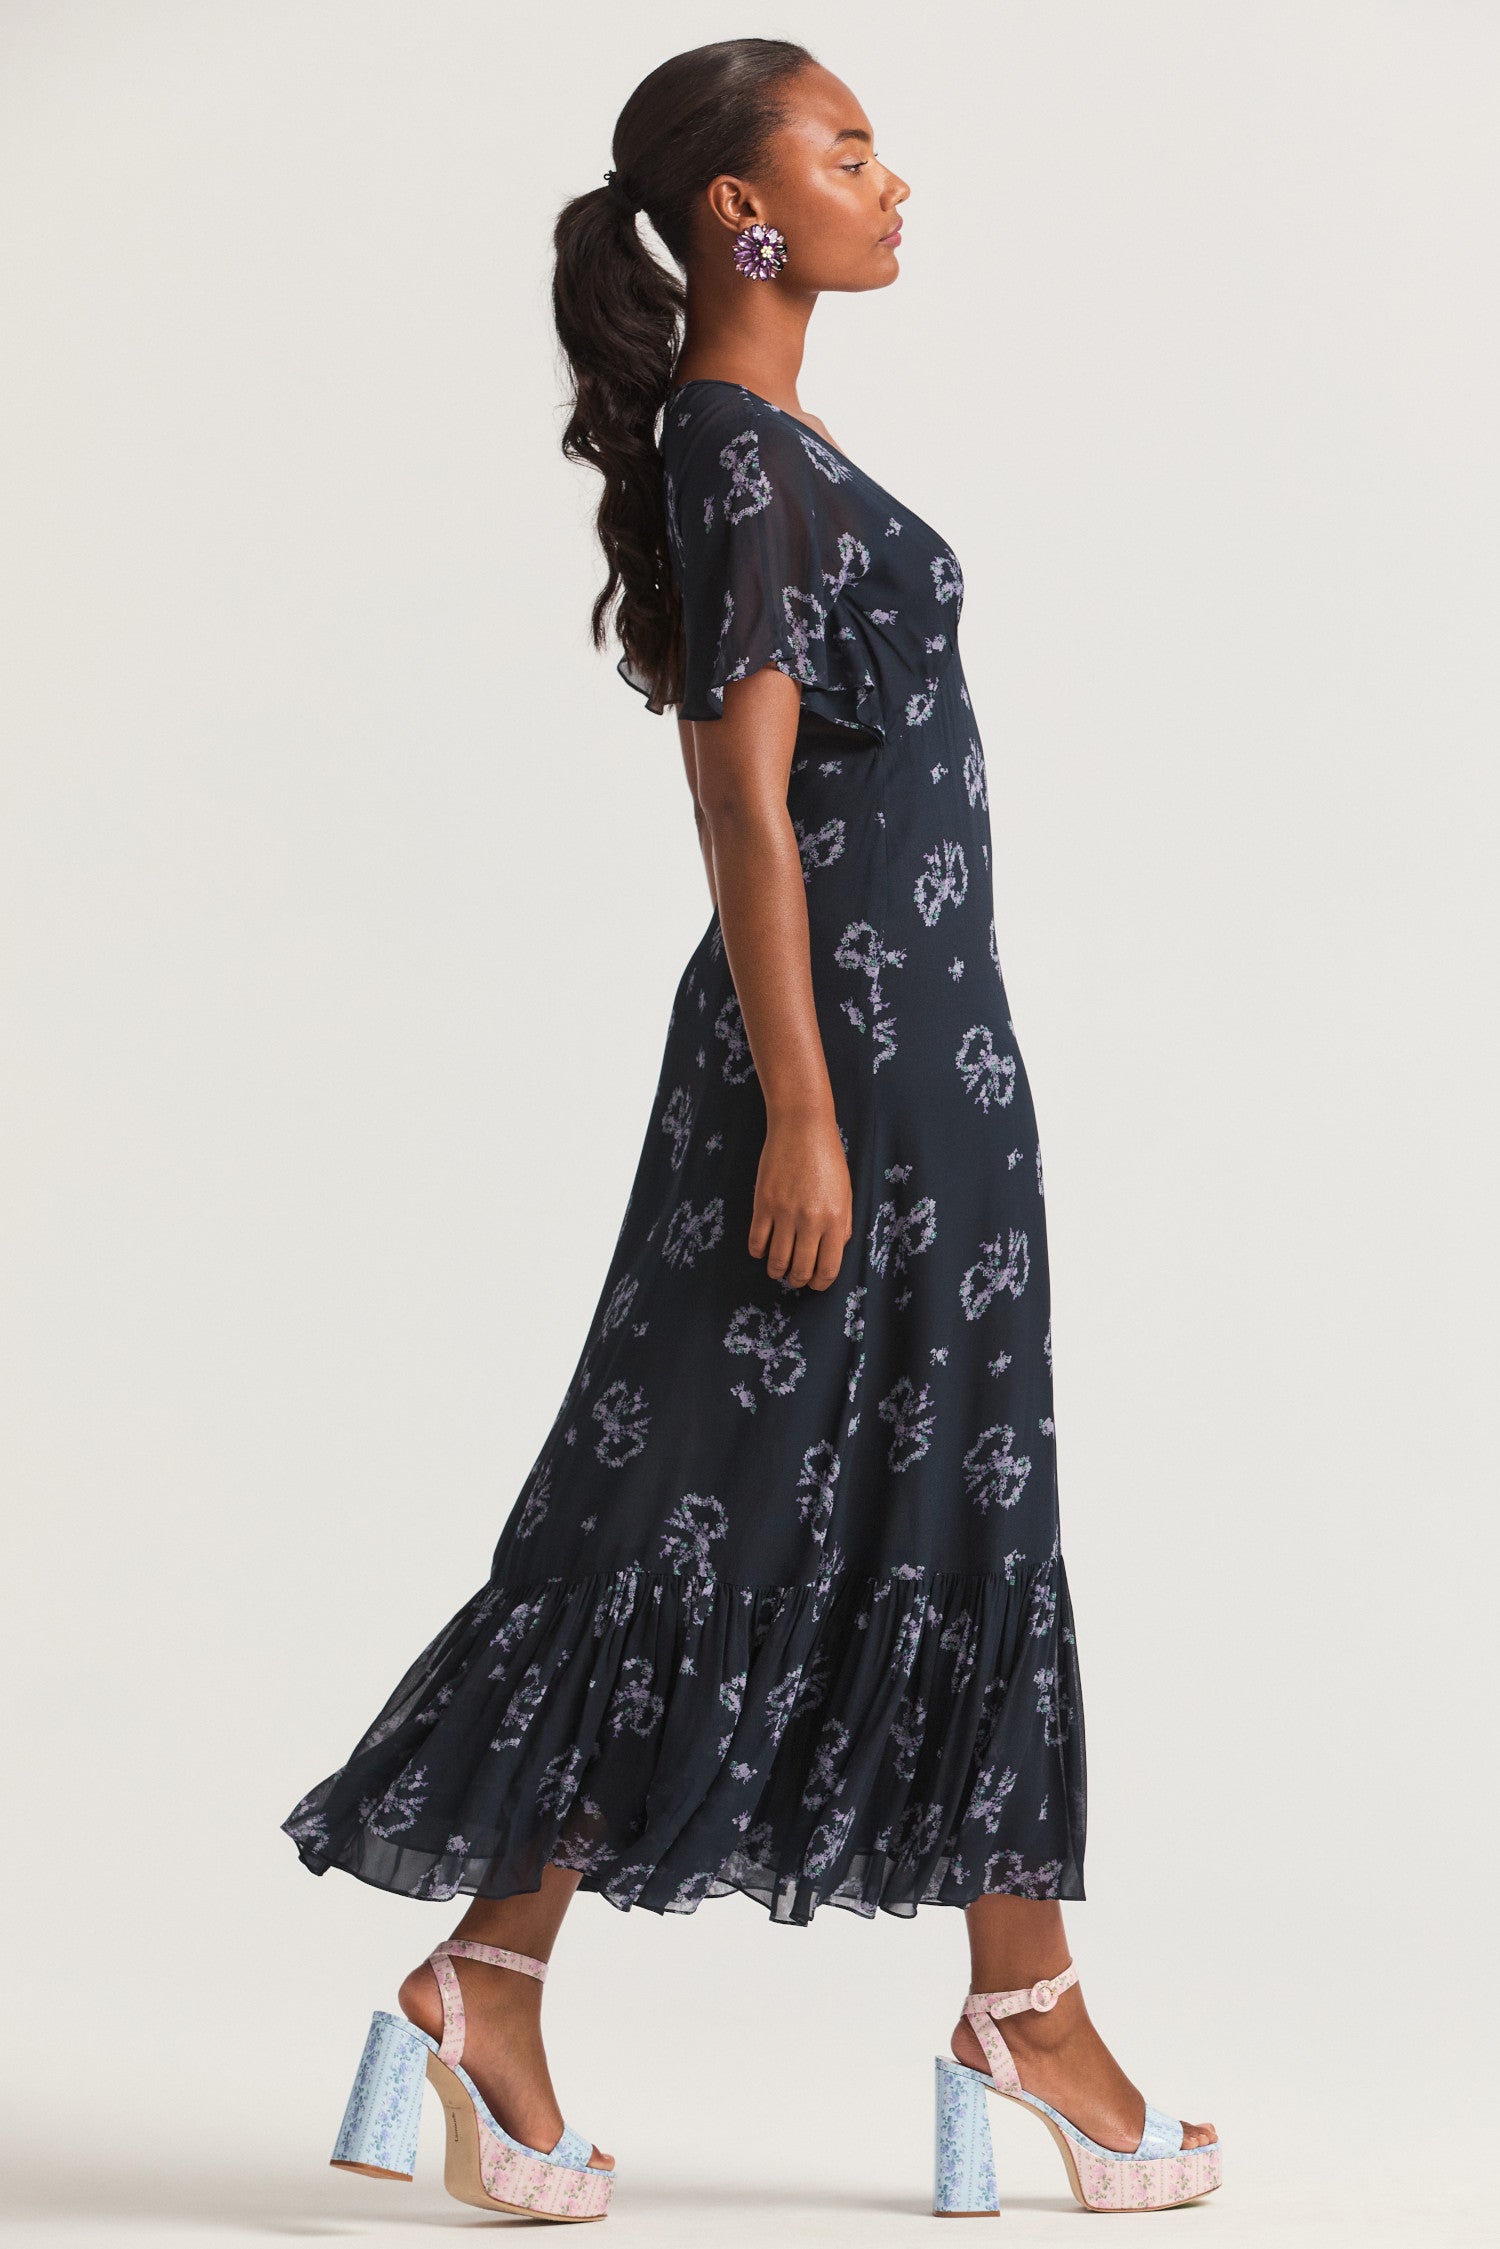 Dark blue slip midi dress, with elegant bow print on a viscose fabric. A deep v neckline with light flutter sleeves falls to a shaped waist seam that flows to a flounce skirt.